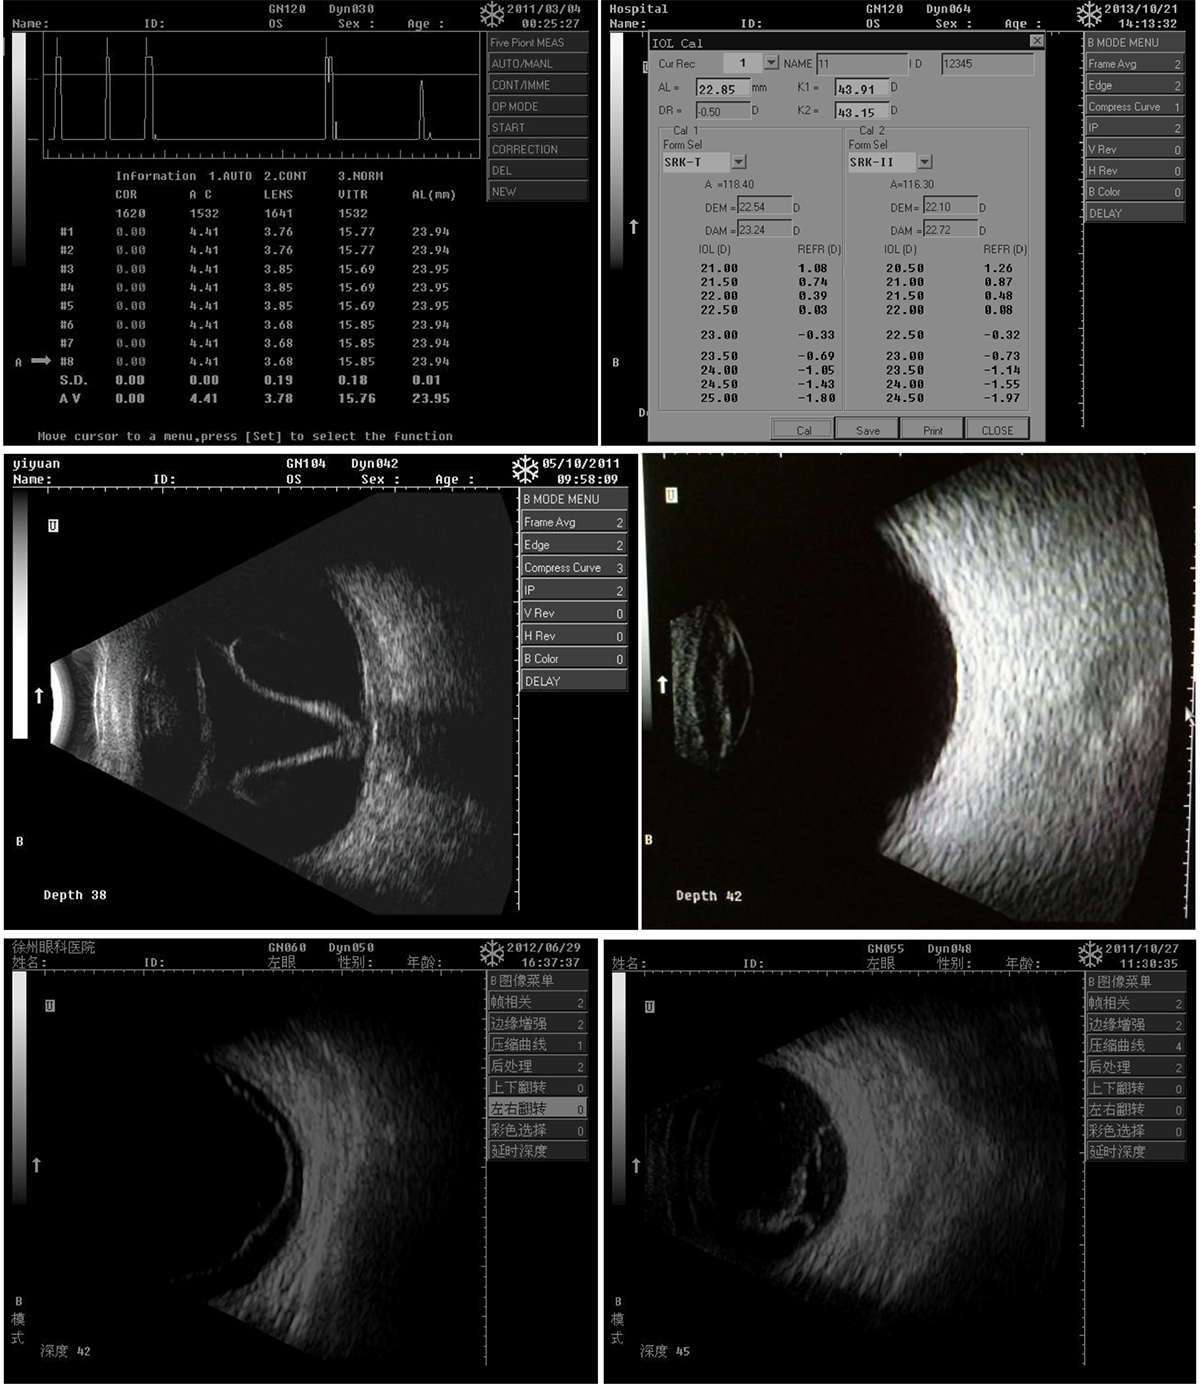 ODU-5 Ophthalmic A and B Scan